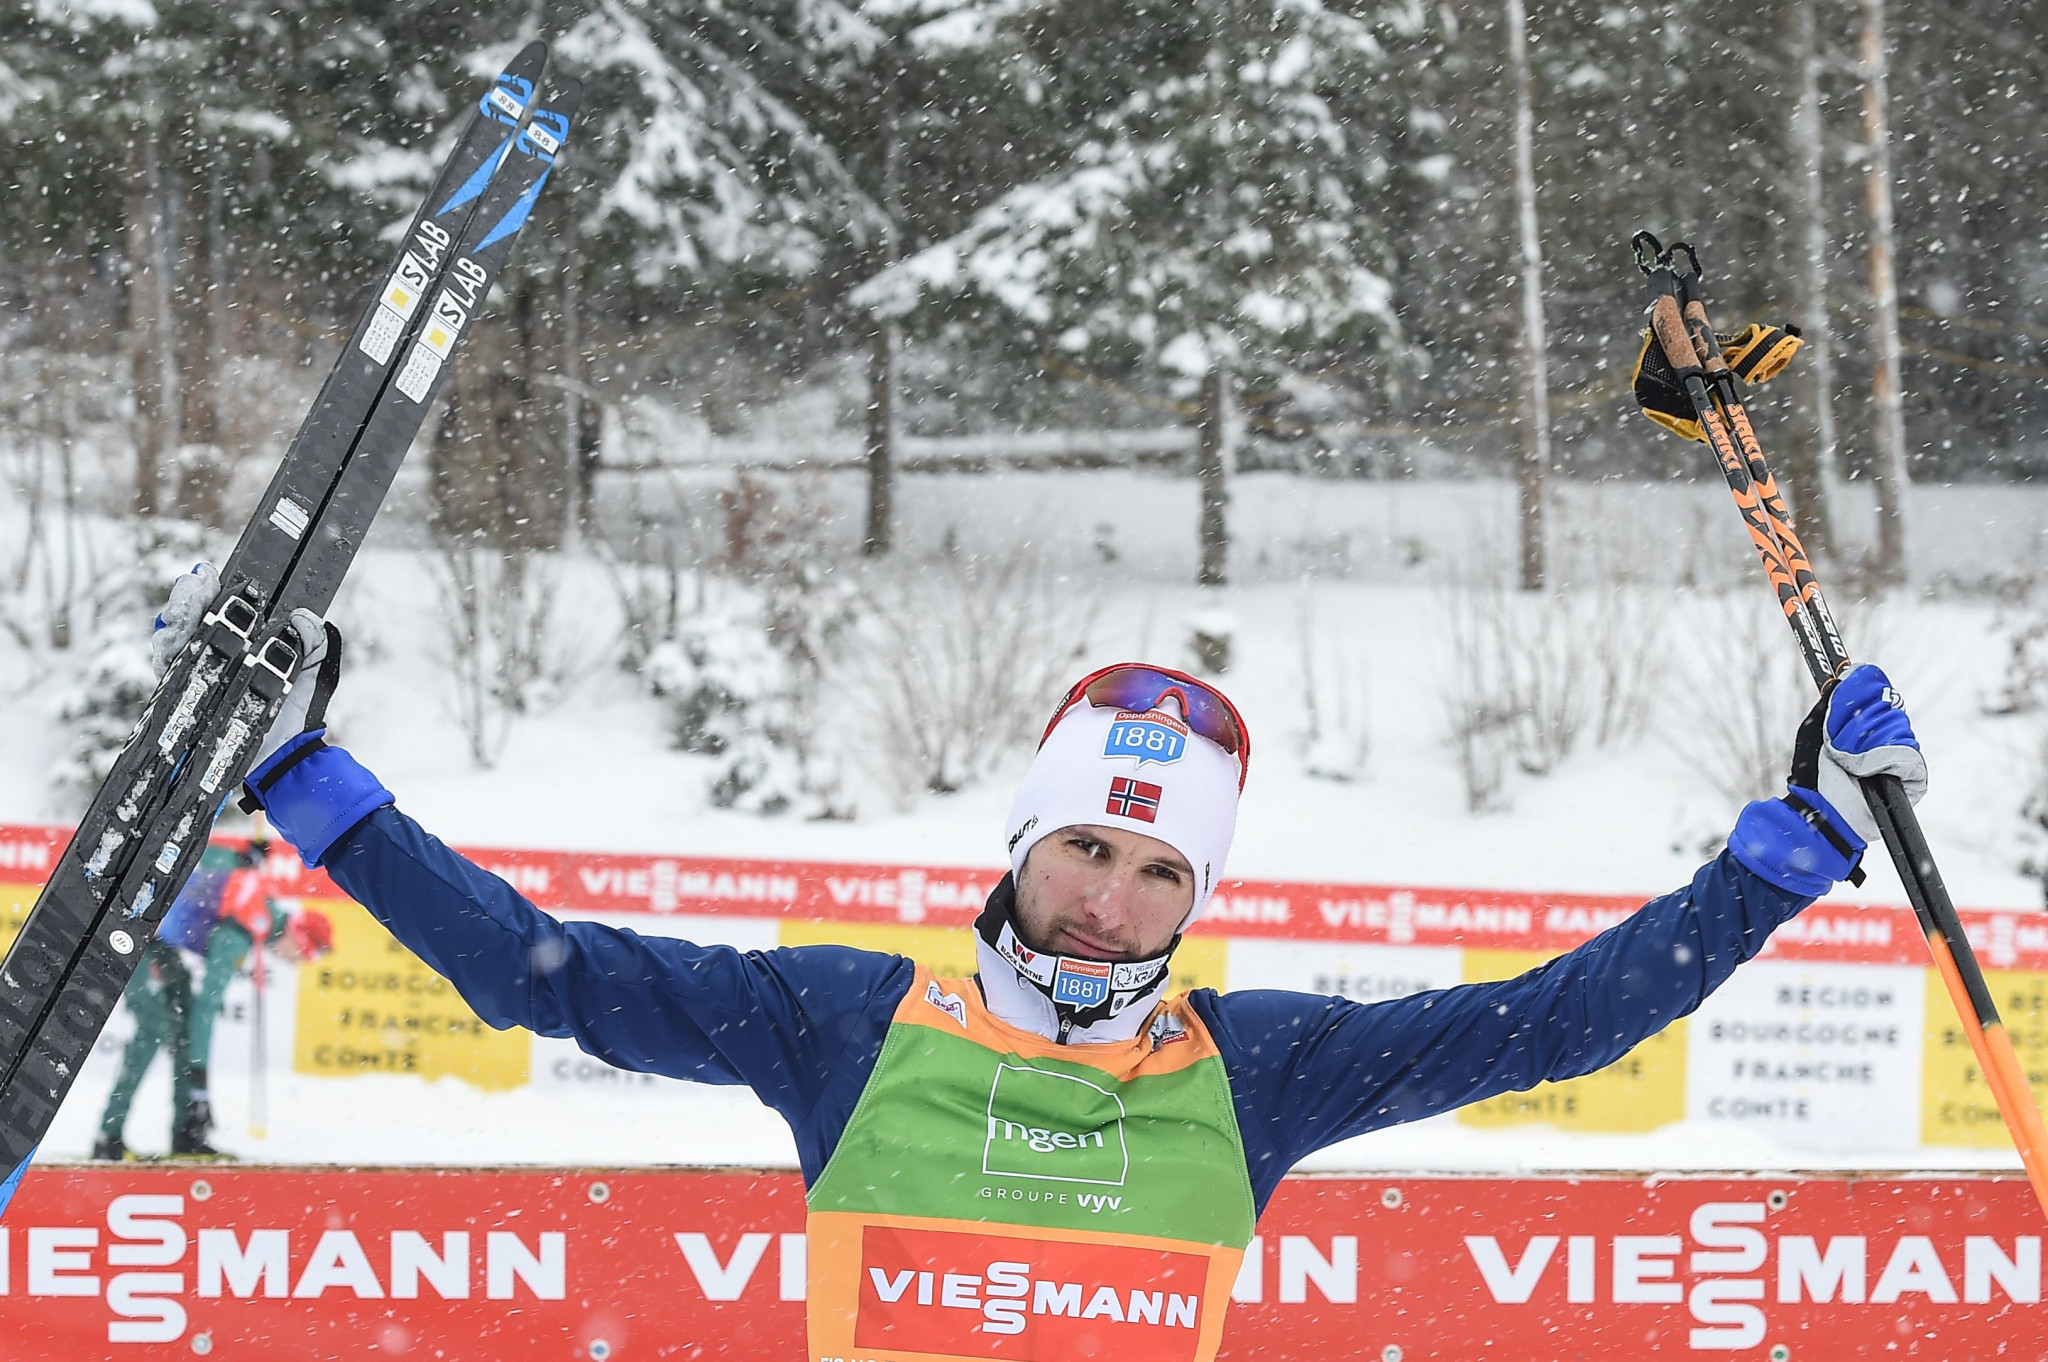 Jan Schmid pictured after his FIS Nordic Combined World Cup win at Chaux-Neuve